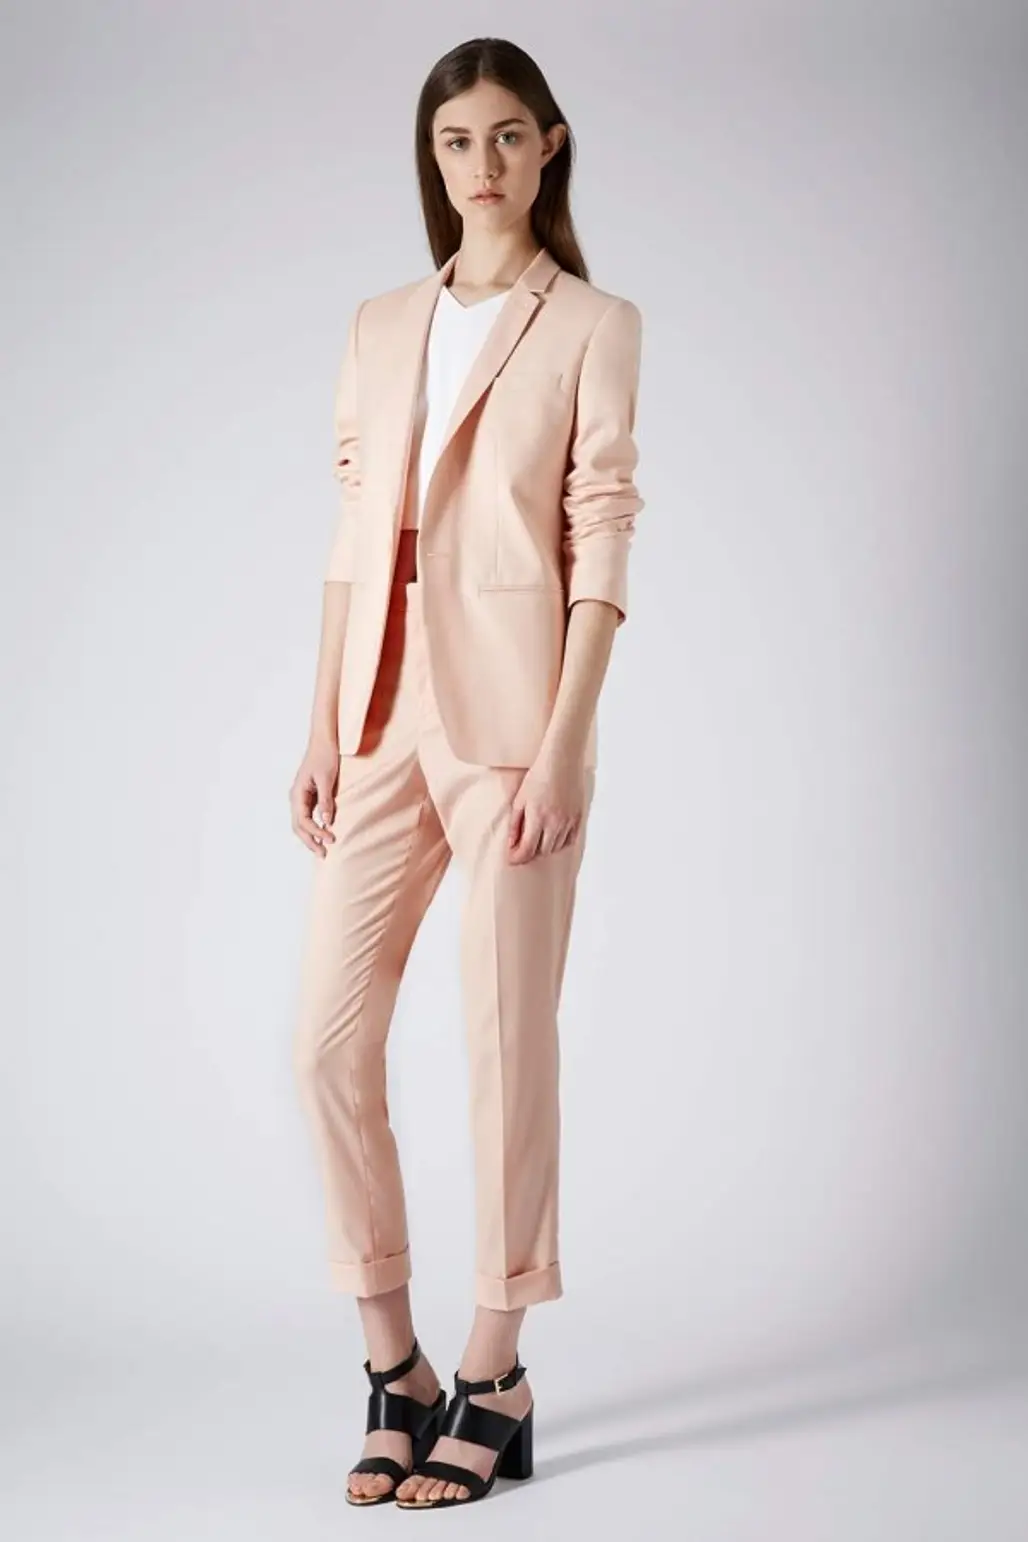 Topshop Suit Blazer and Trousers